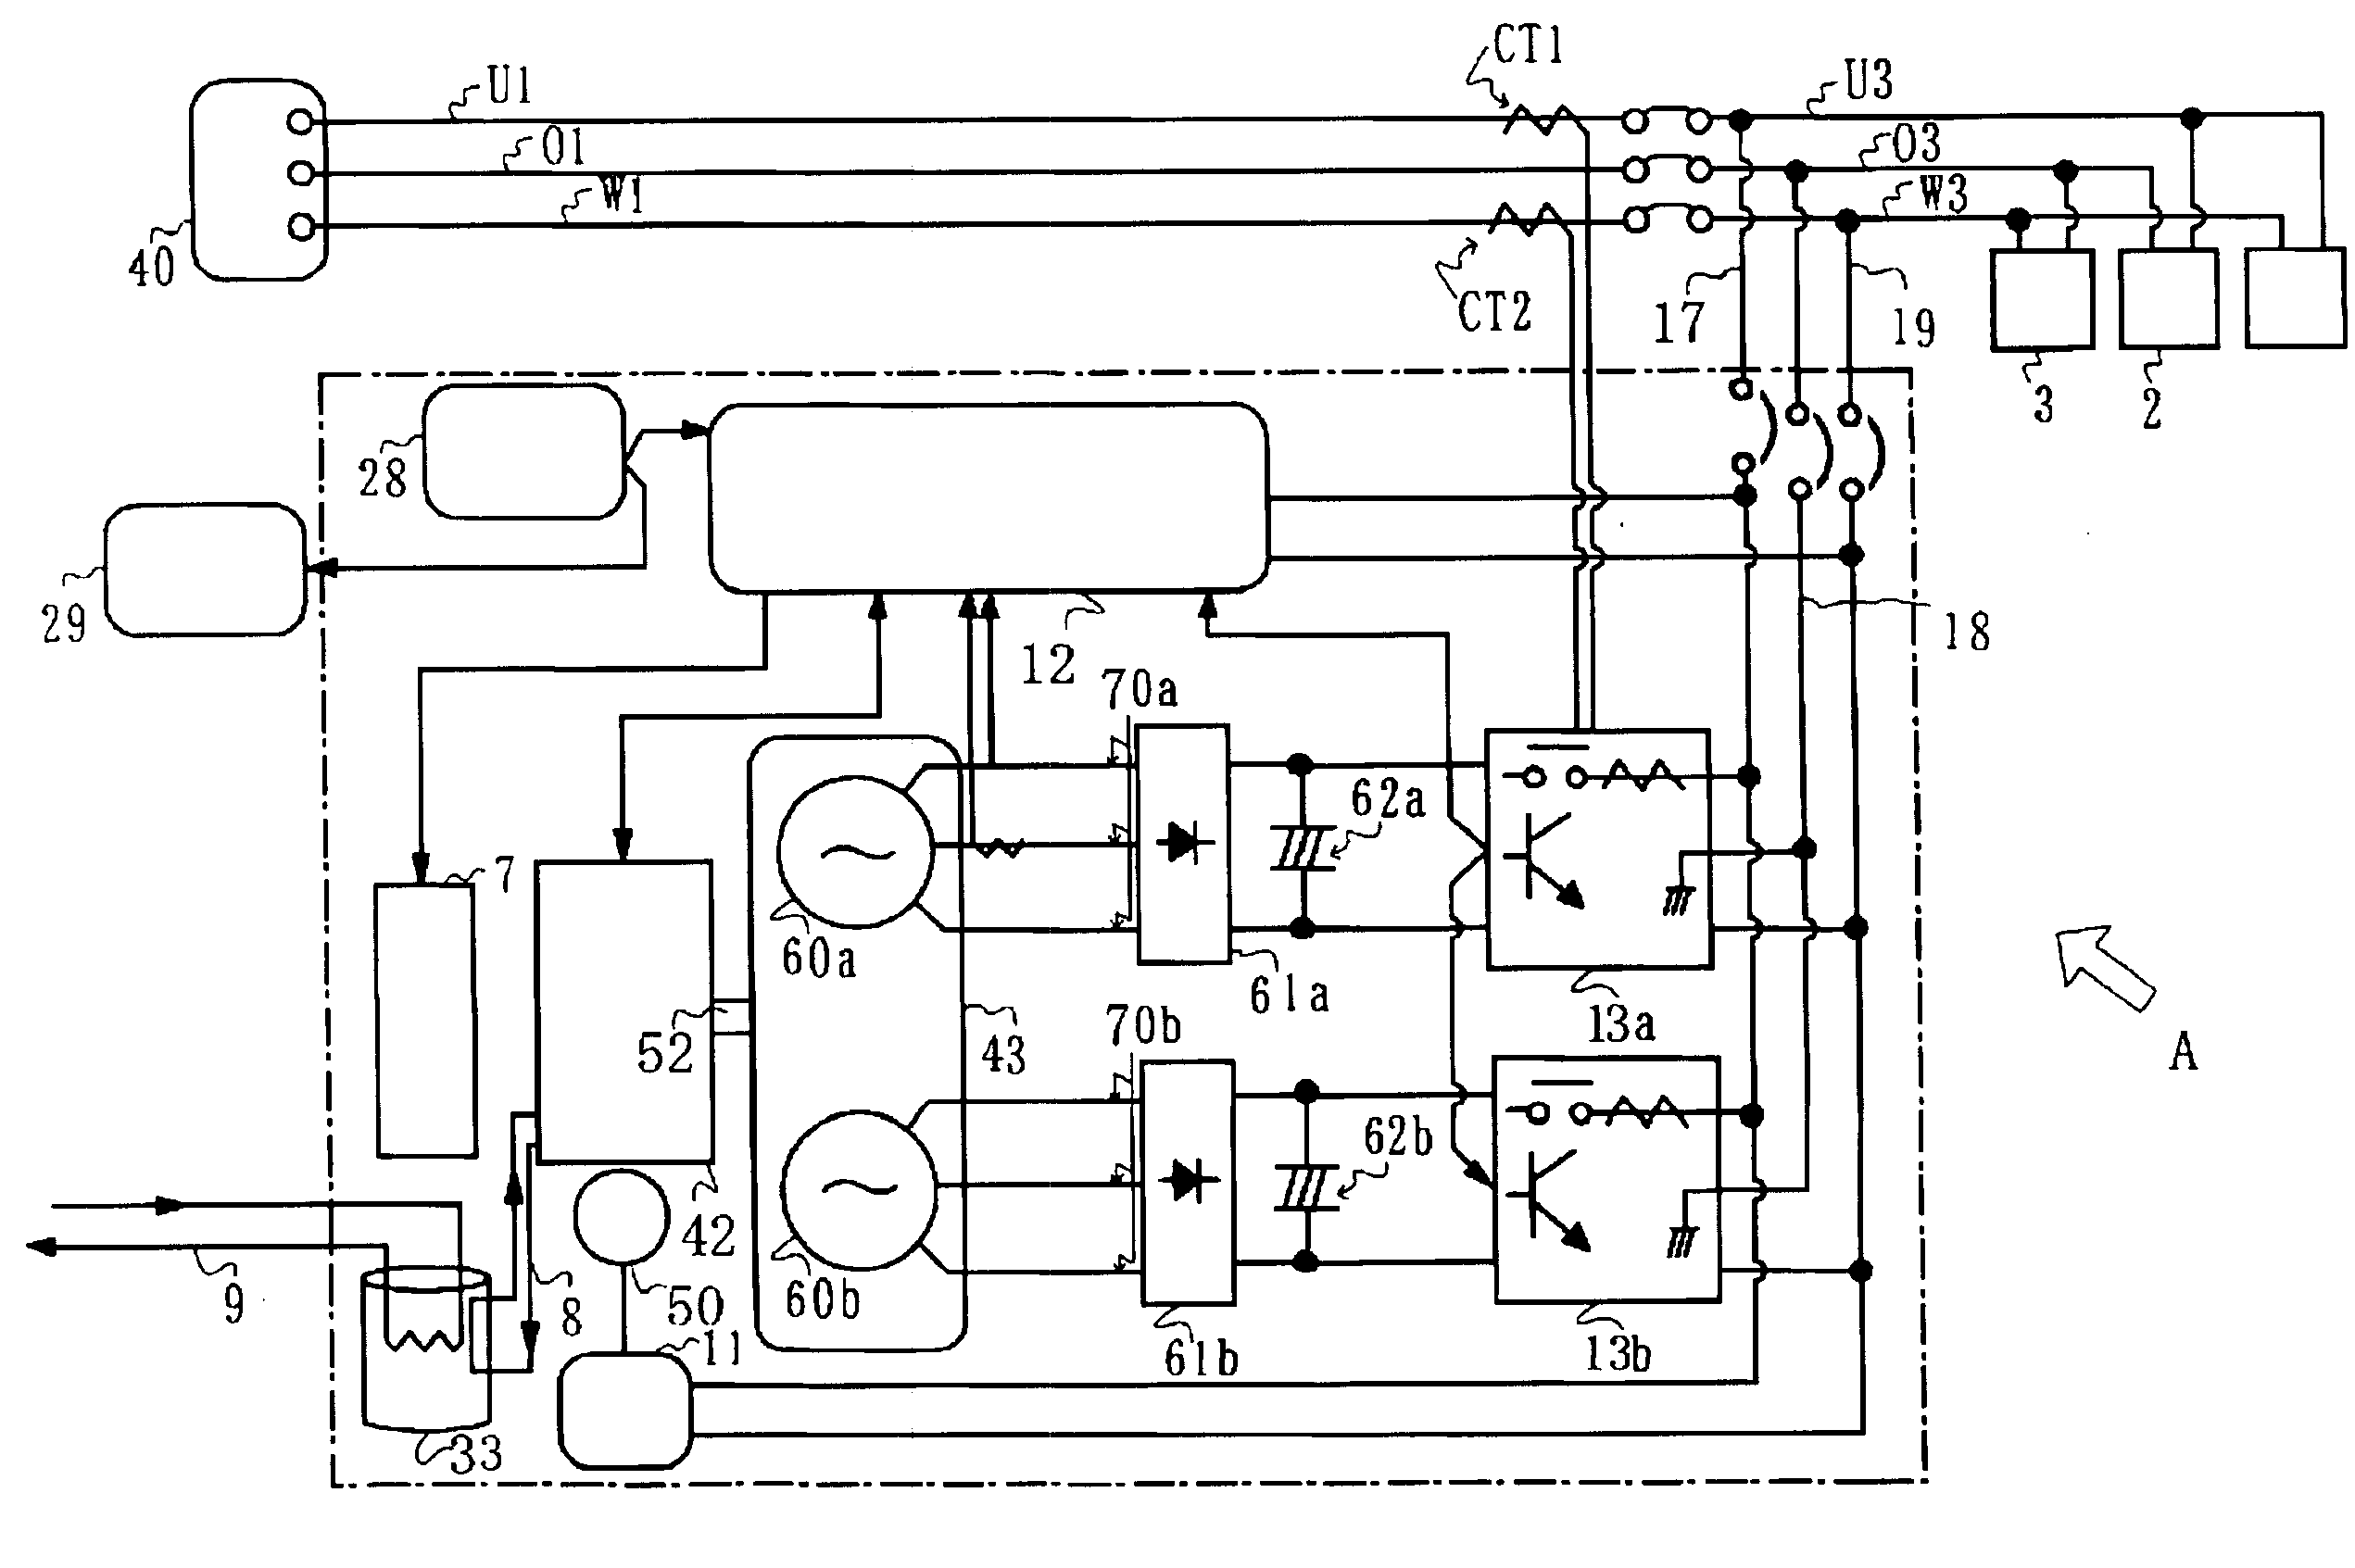 Power system having generator driven by engine